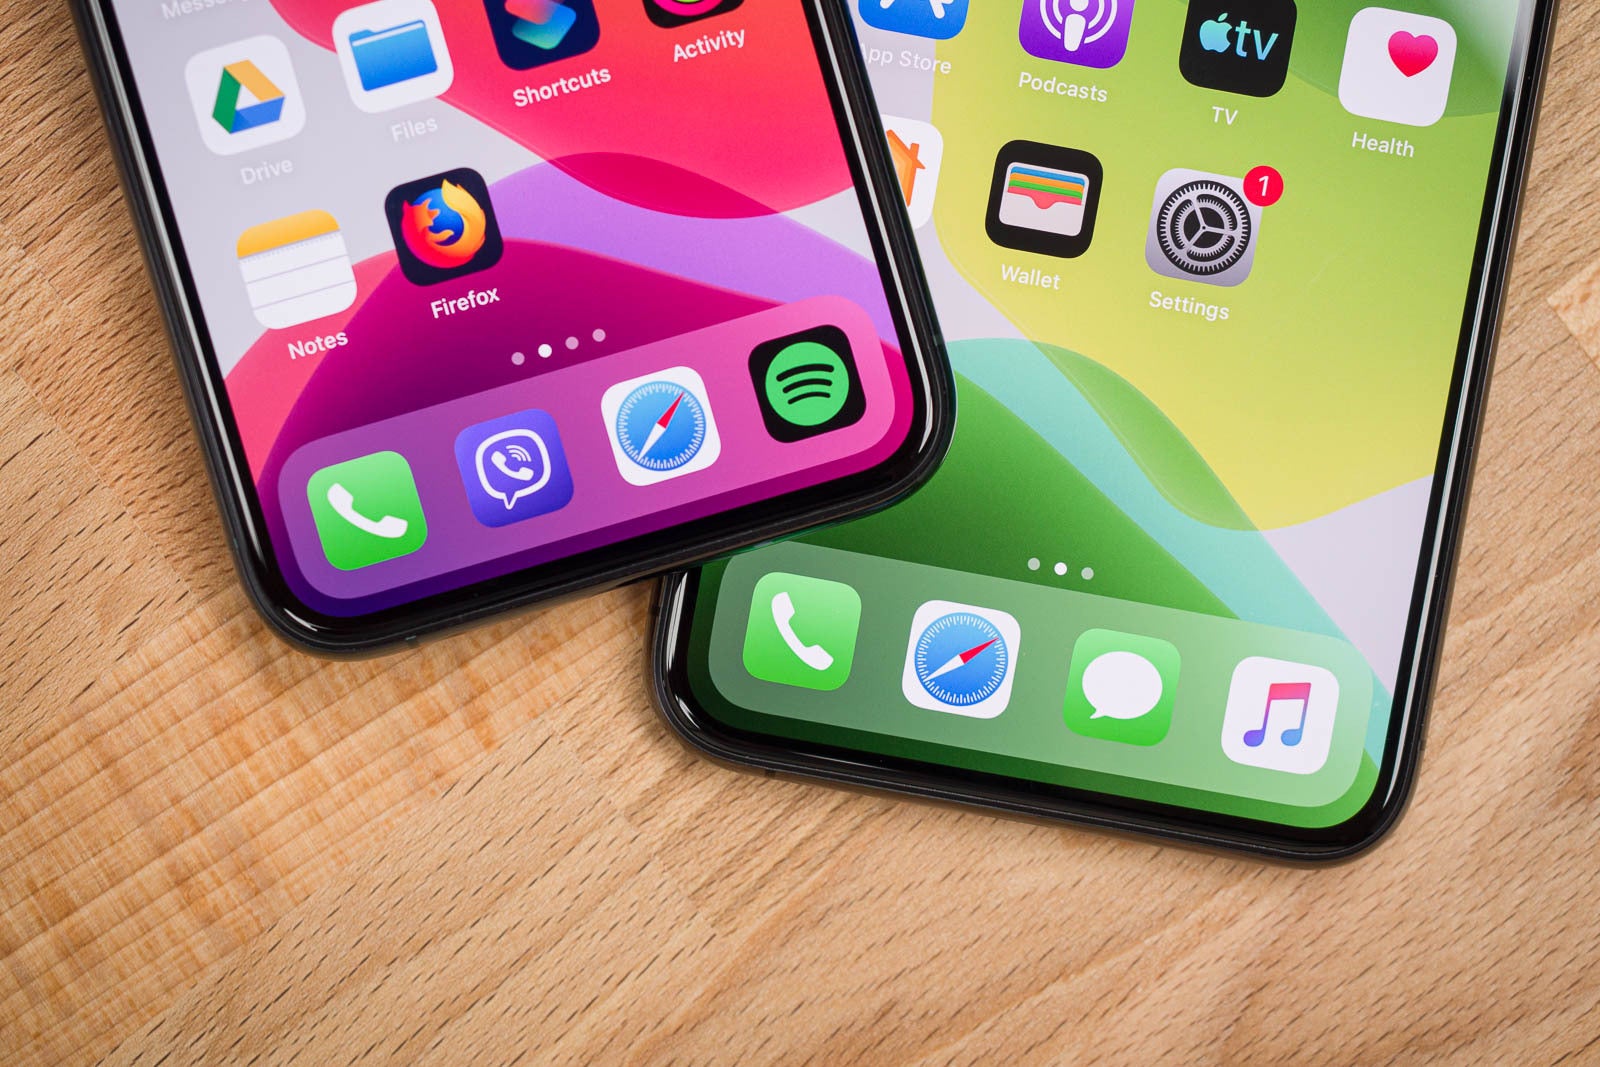 Apple iPhone 11 Pro and Pro Max Review